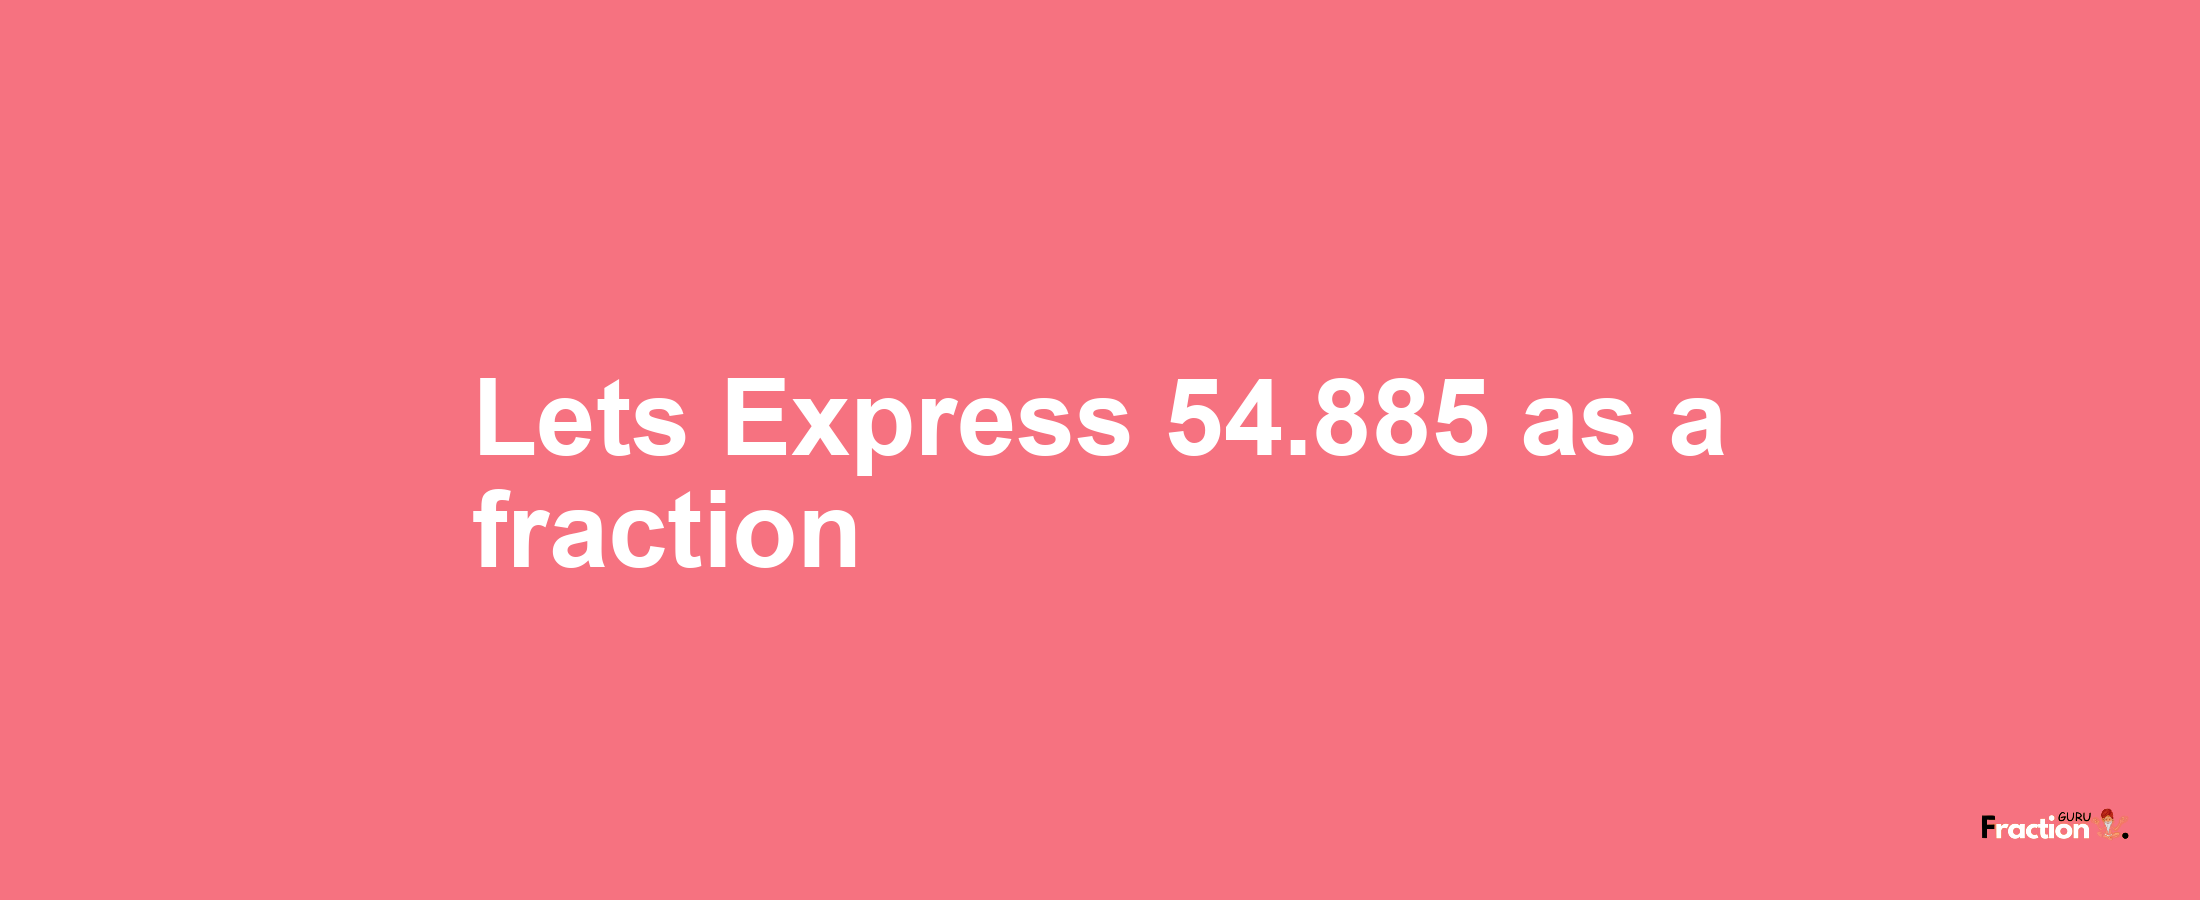 Lets Express 54.885 as afraction